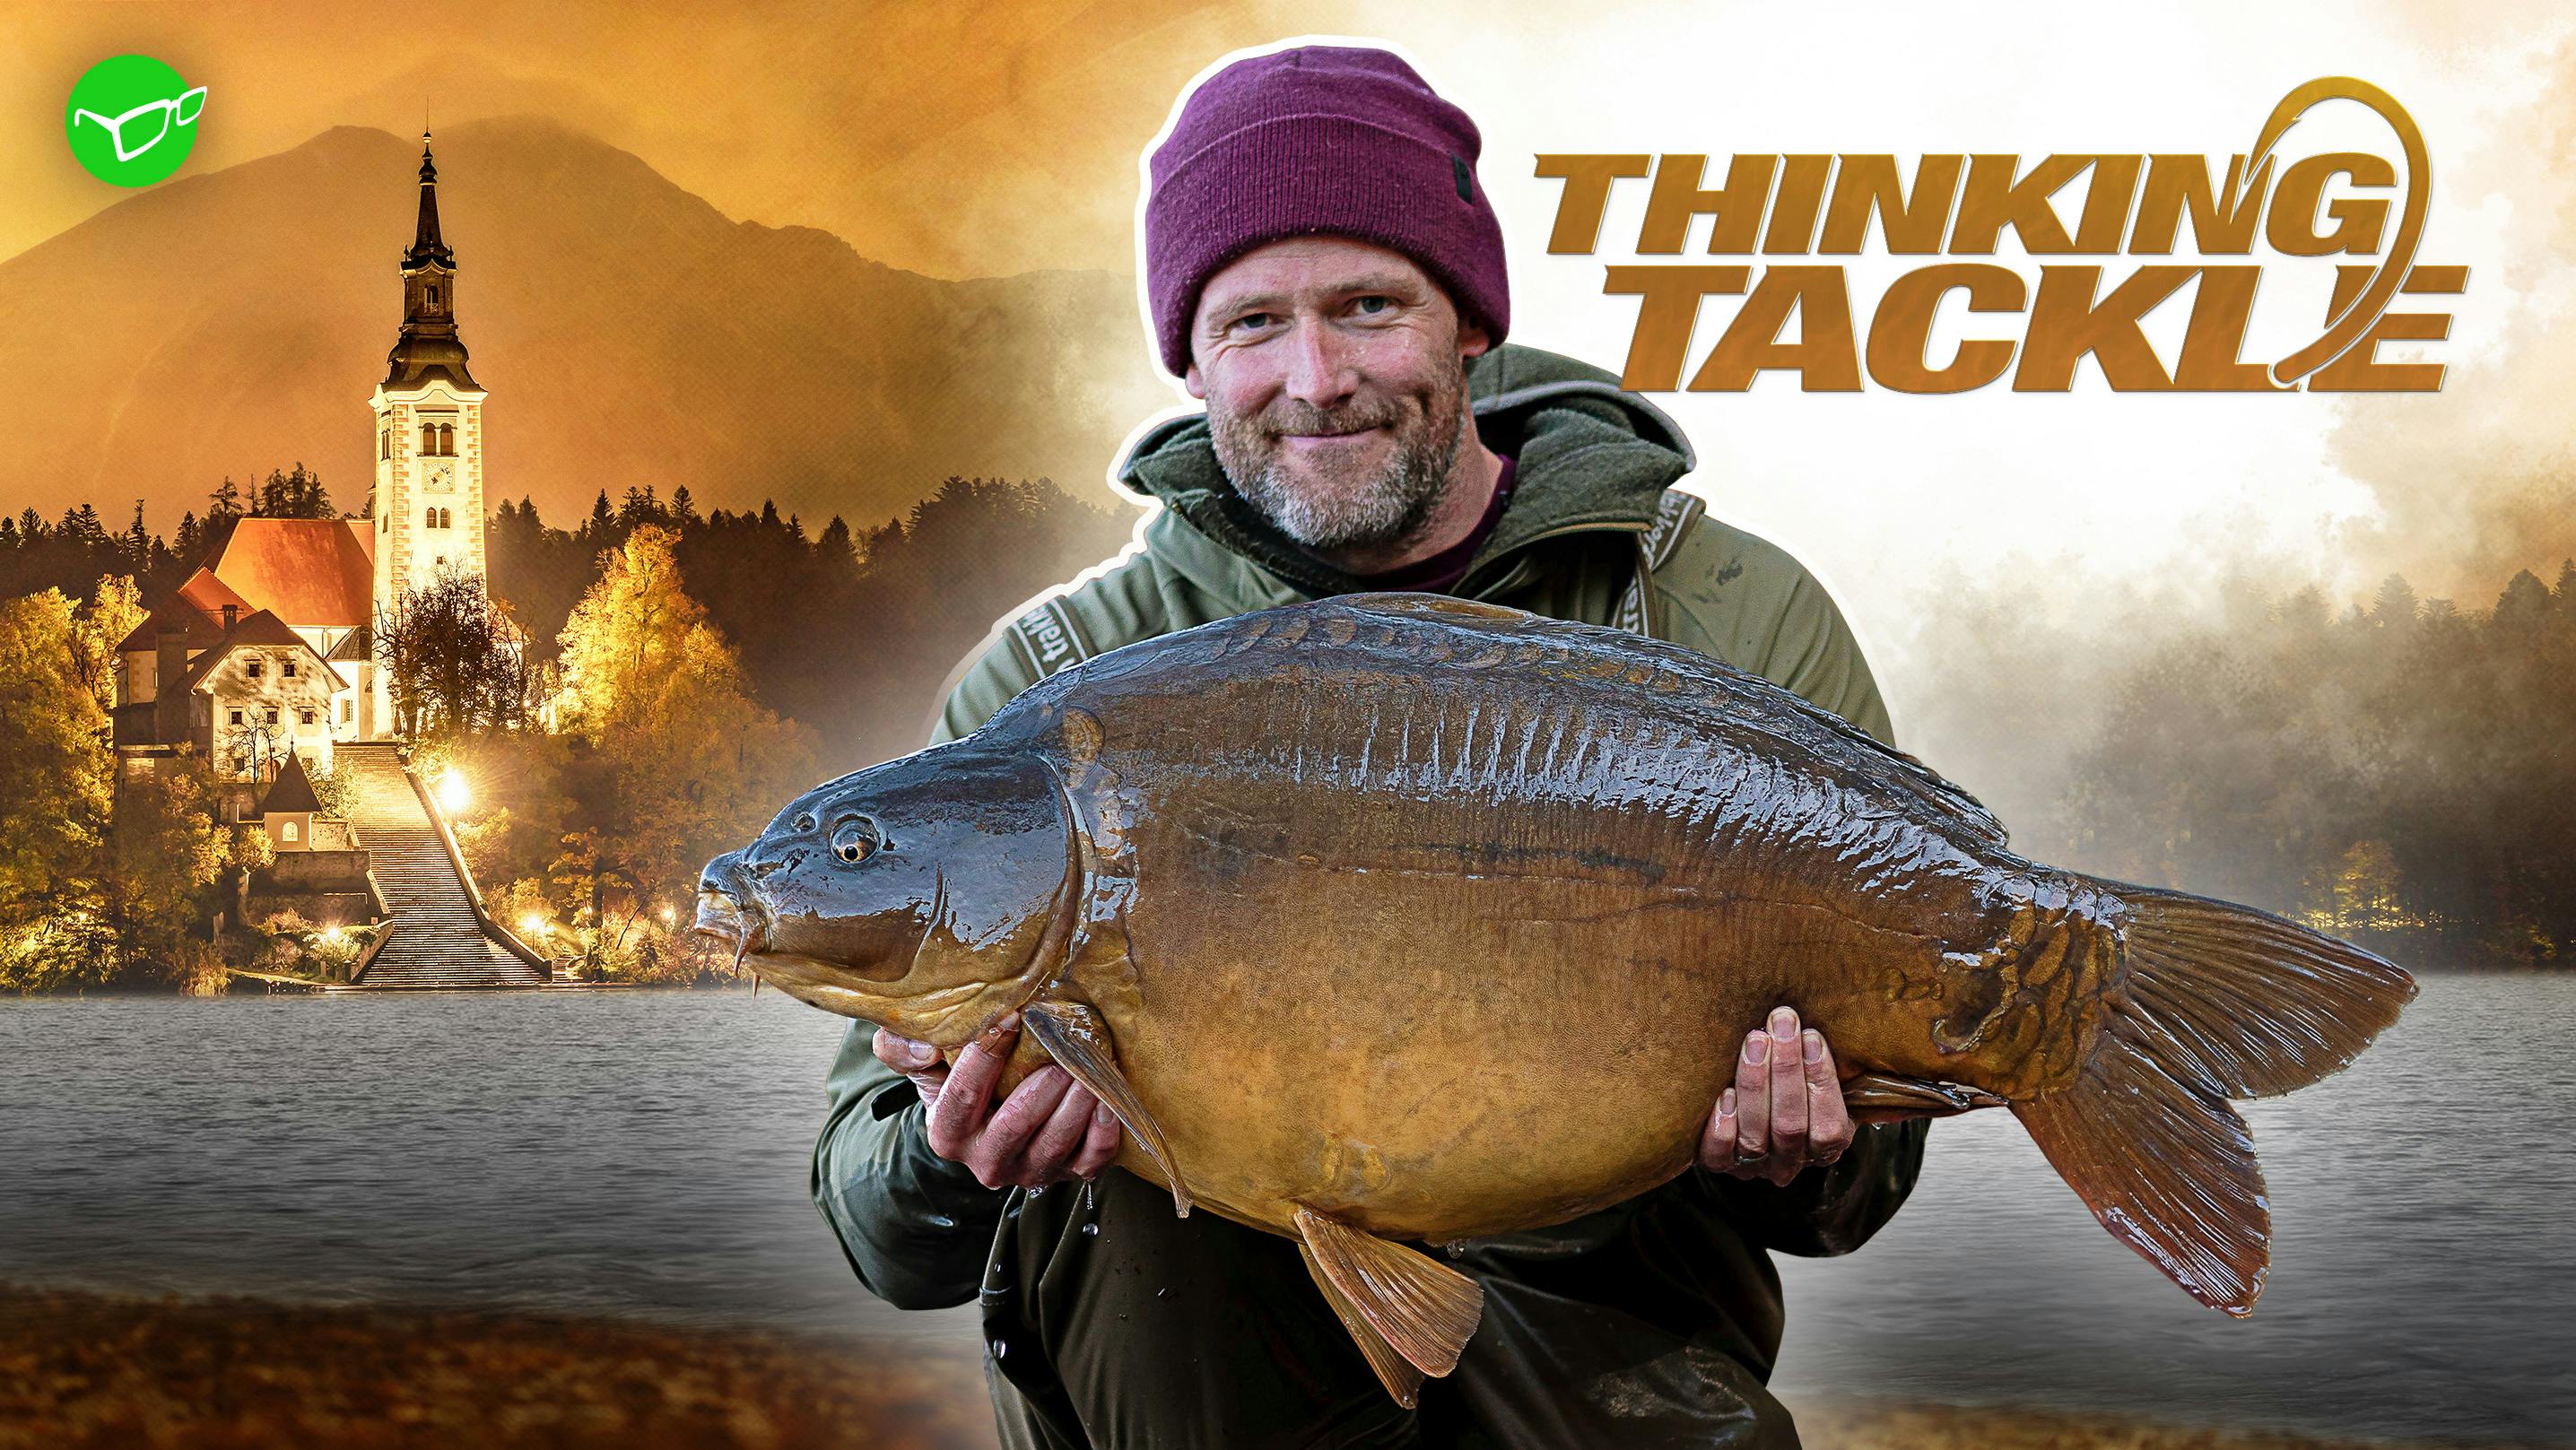 New Thinking Tackle film at the iconic Lake Bled